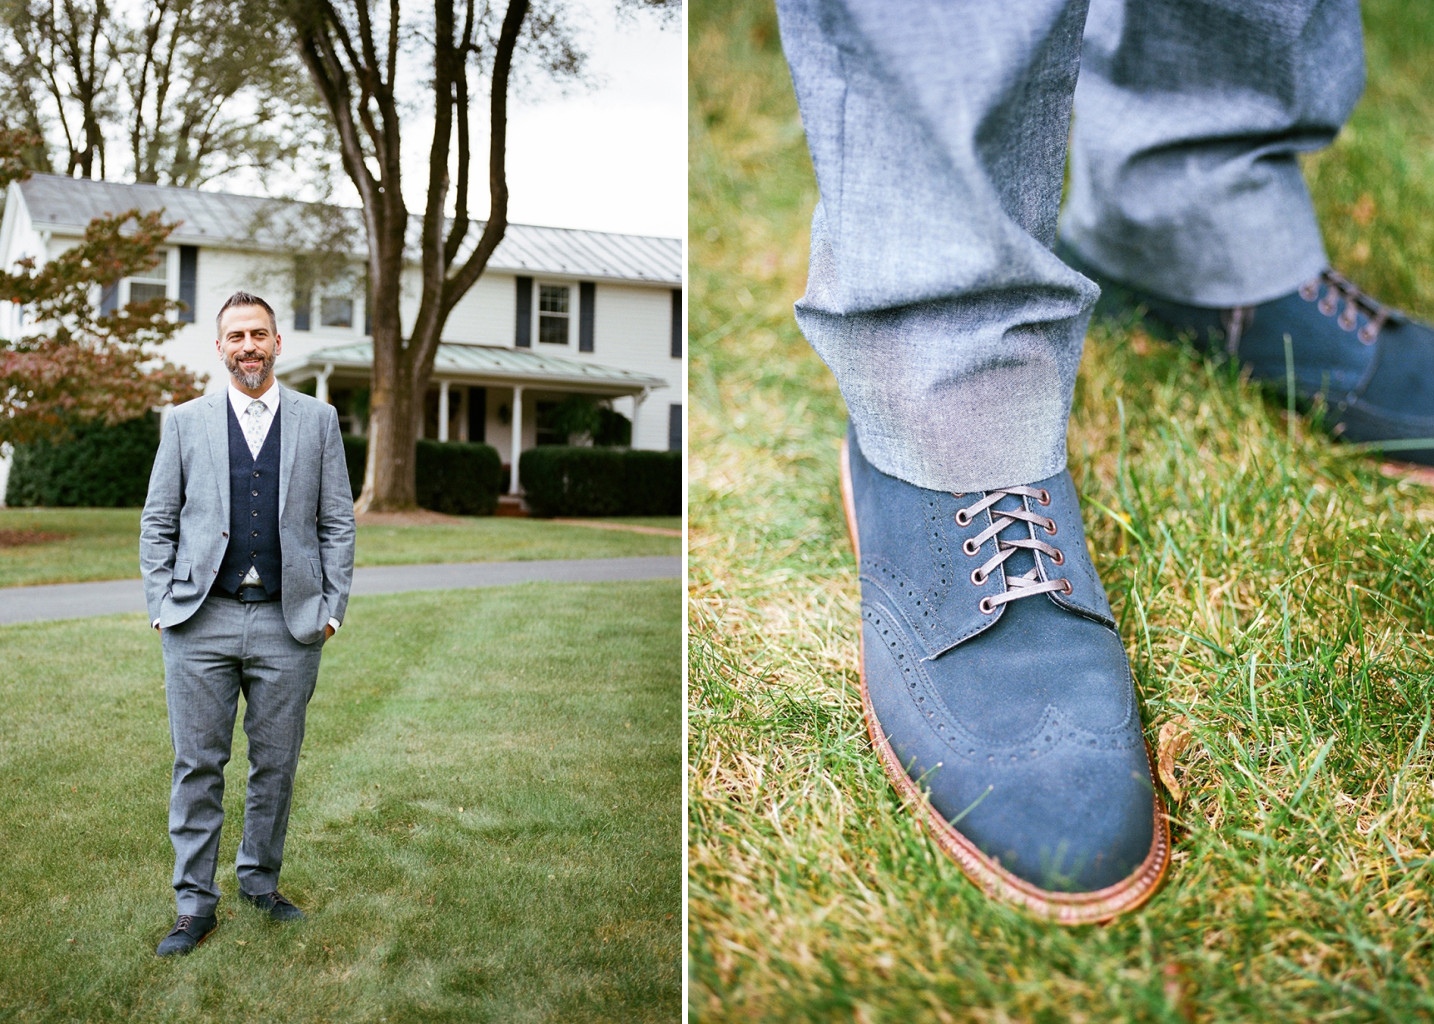 Snippets, Whispers & Ribbons - Groom's Attire Inspiration